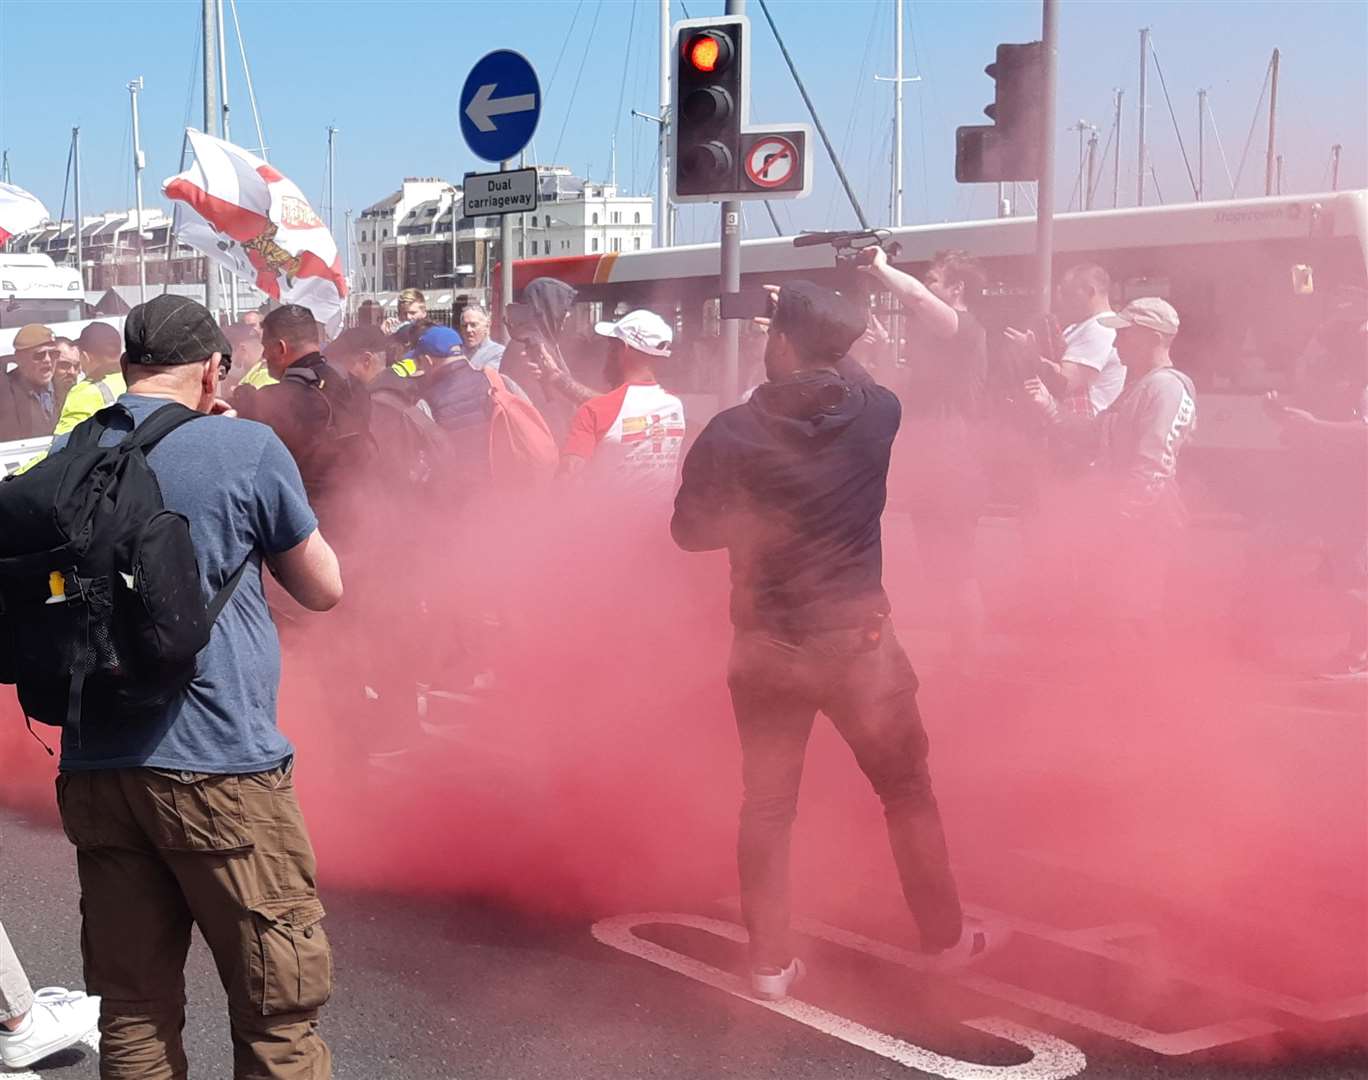 Somebody set off a harmless red smoke canister during the march at Snargate Street, Picture: Sam Lennon